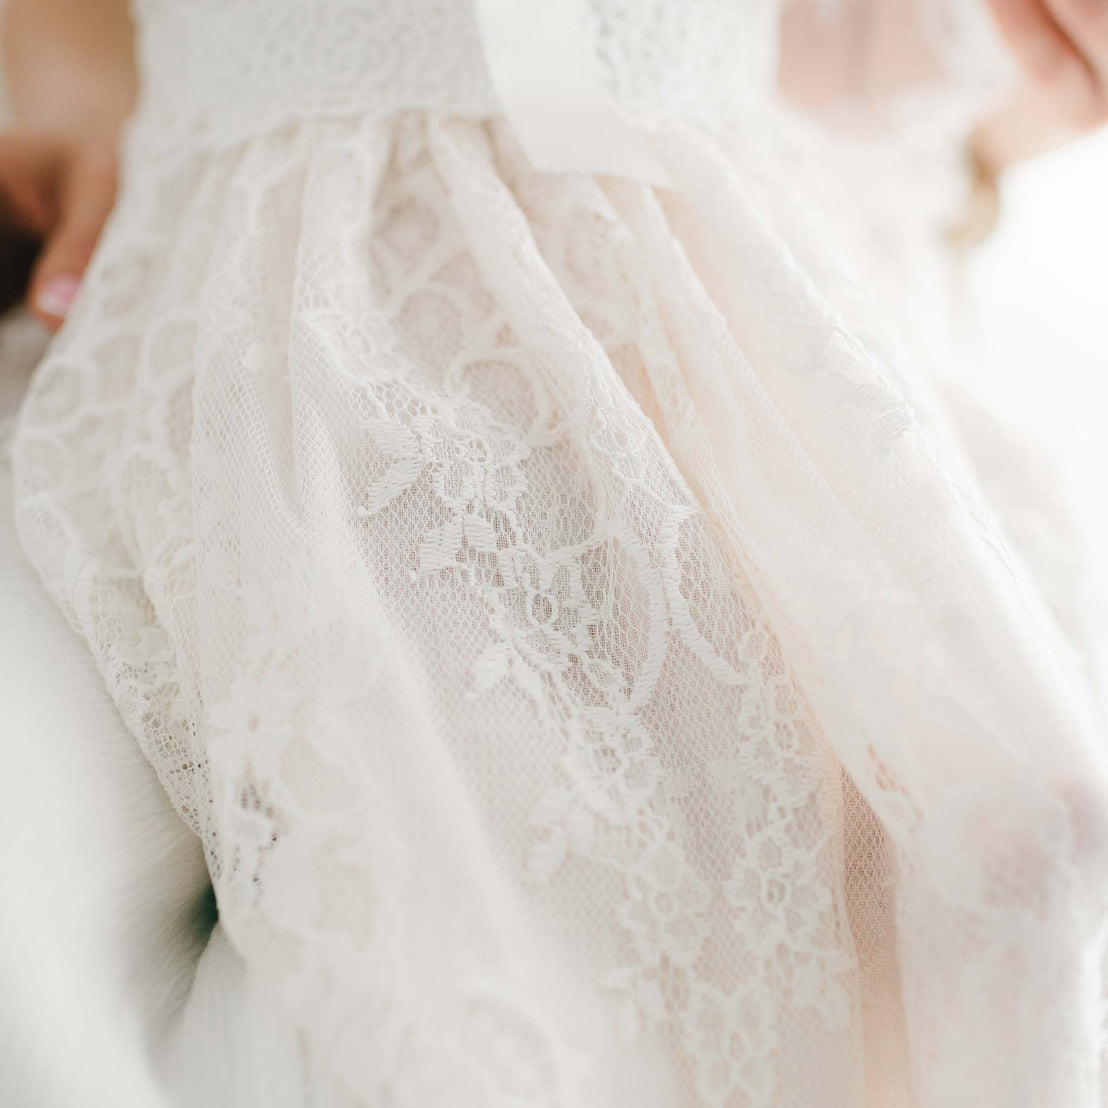 Close-up of a bride's Juliette Christening Gown & Bonnet, focusing on the detailed floral patterns on the vintage fabric, with a soft light illuminating the gown.